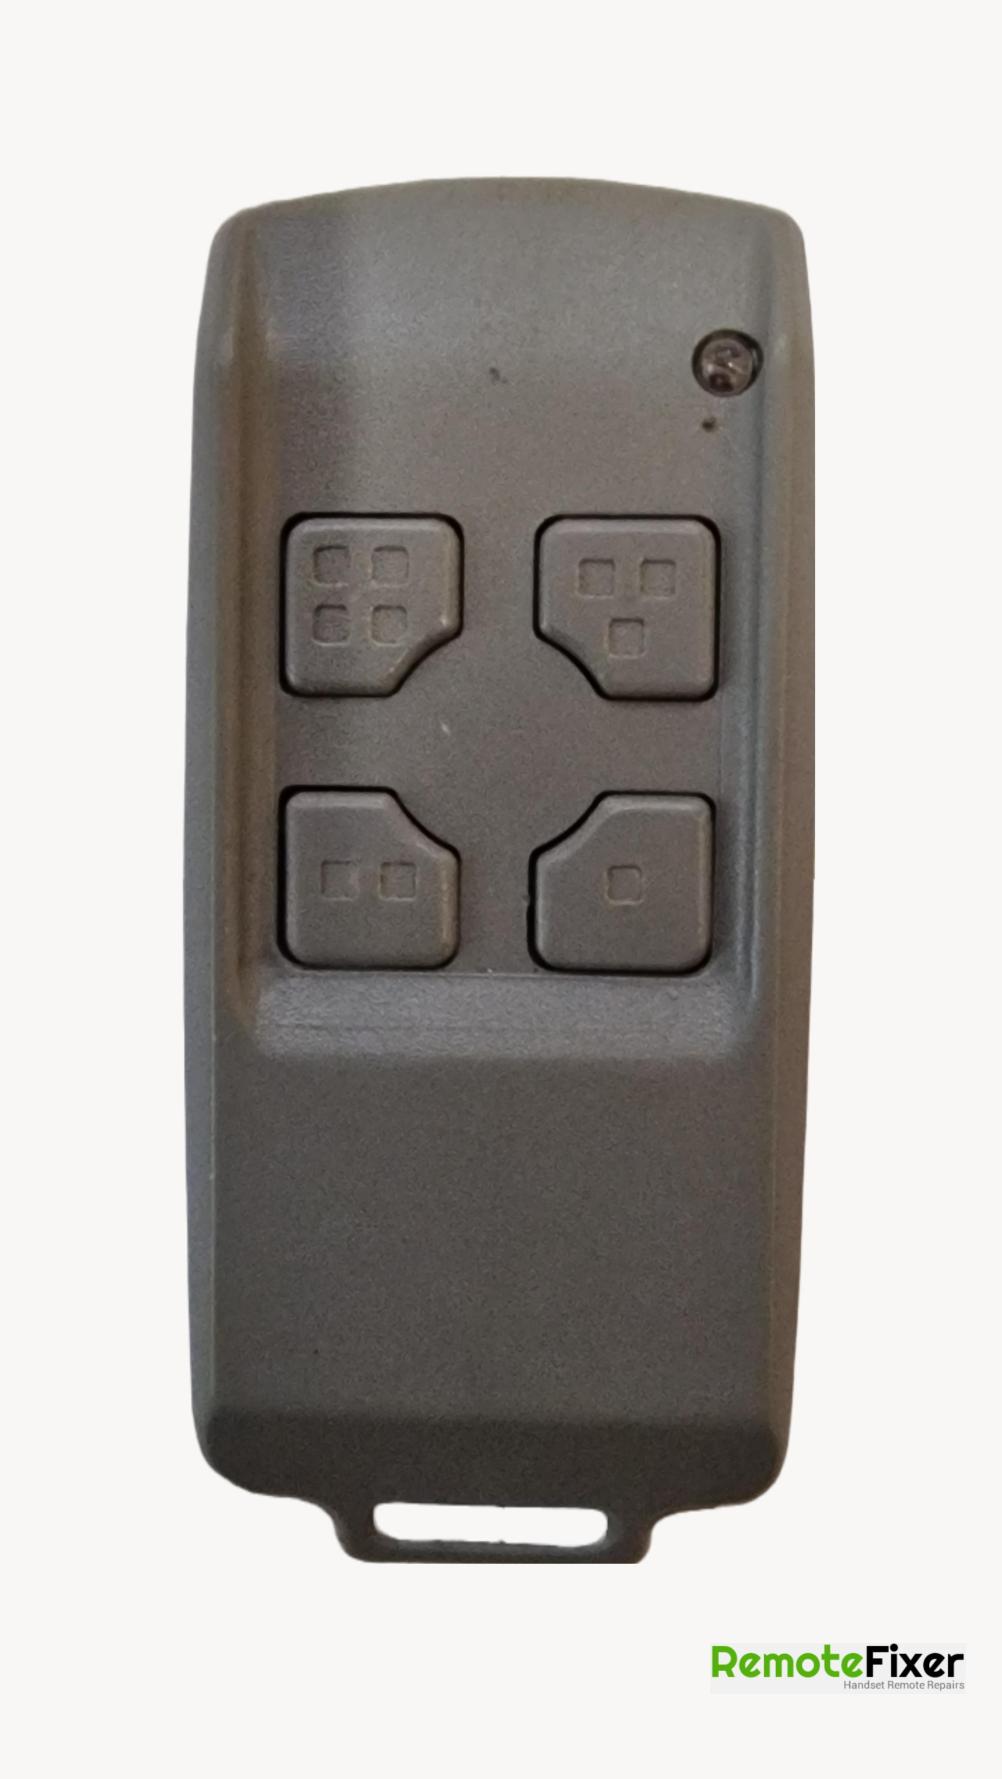 Zap MPT 1340 Remote Control - Front Image